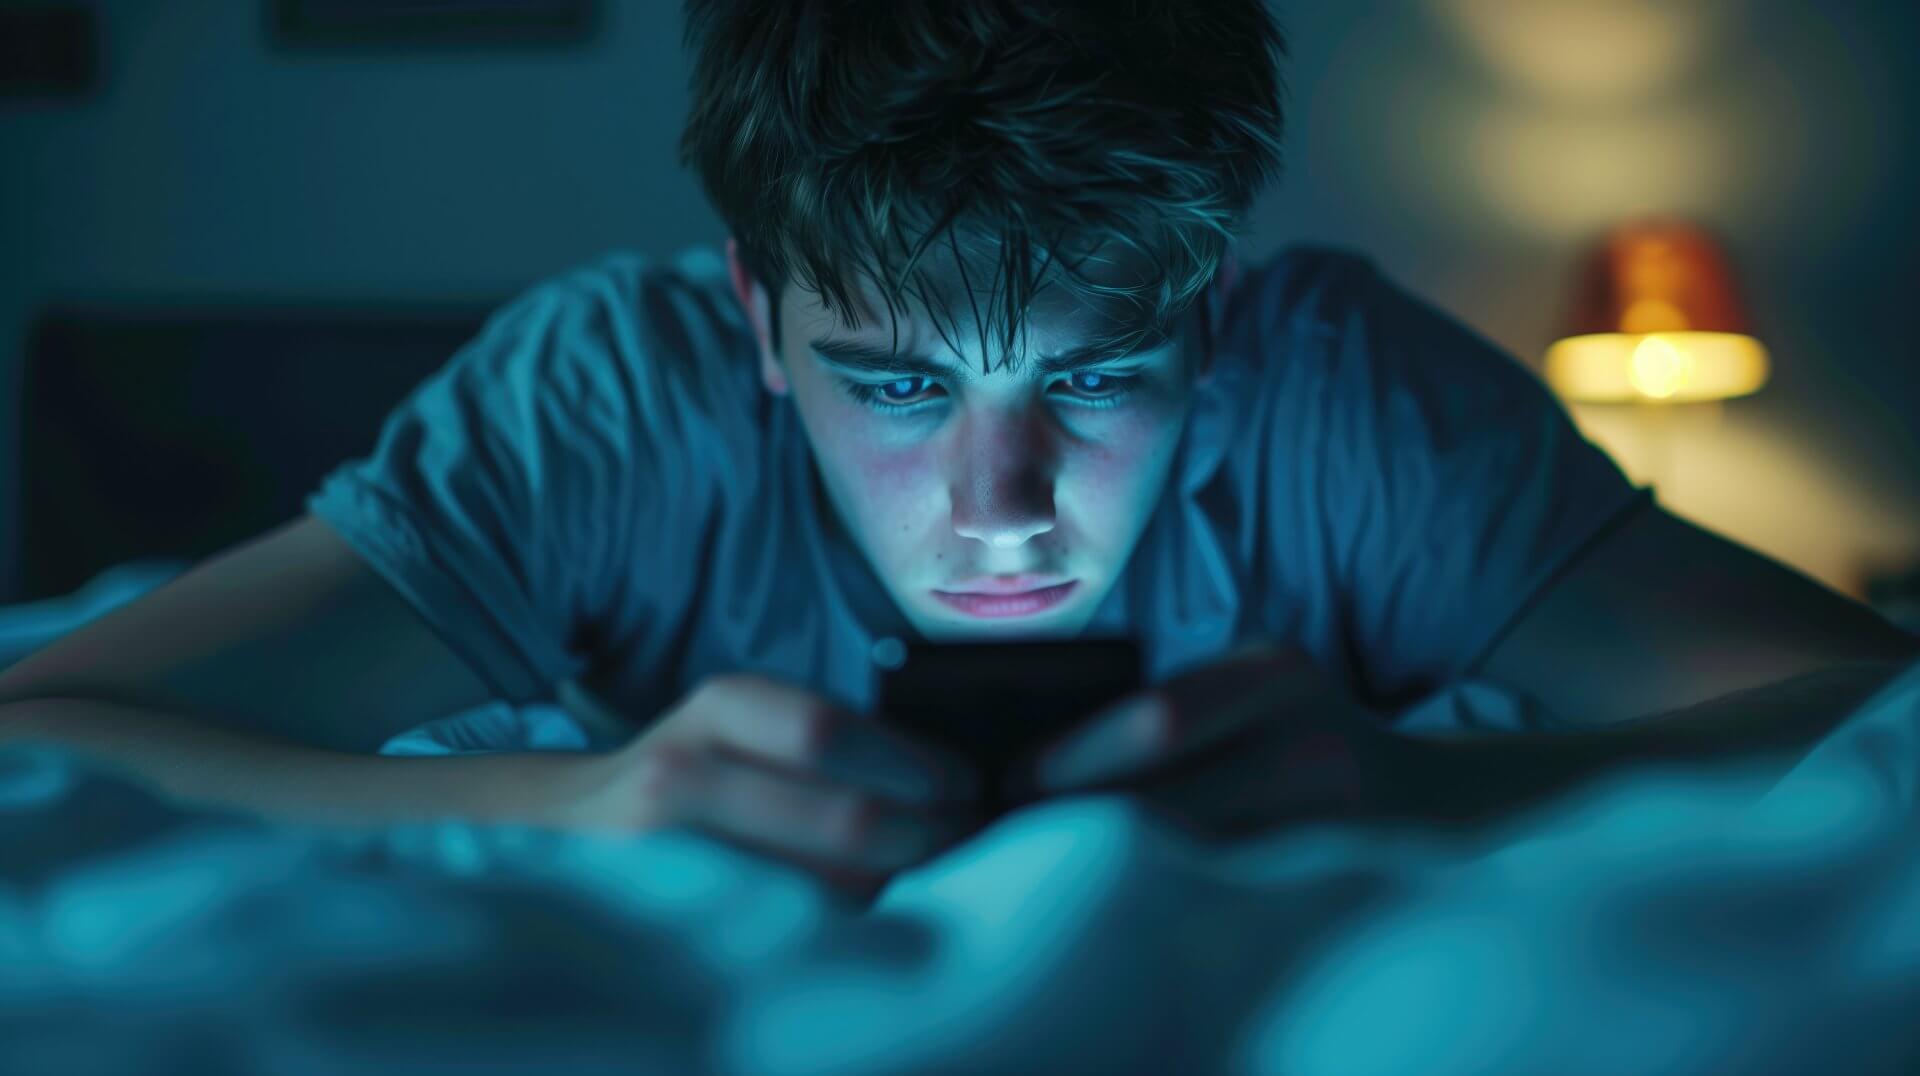 Teenager boy addicted to a social media using phone lying in bed at night.